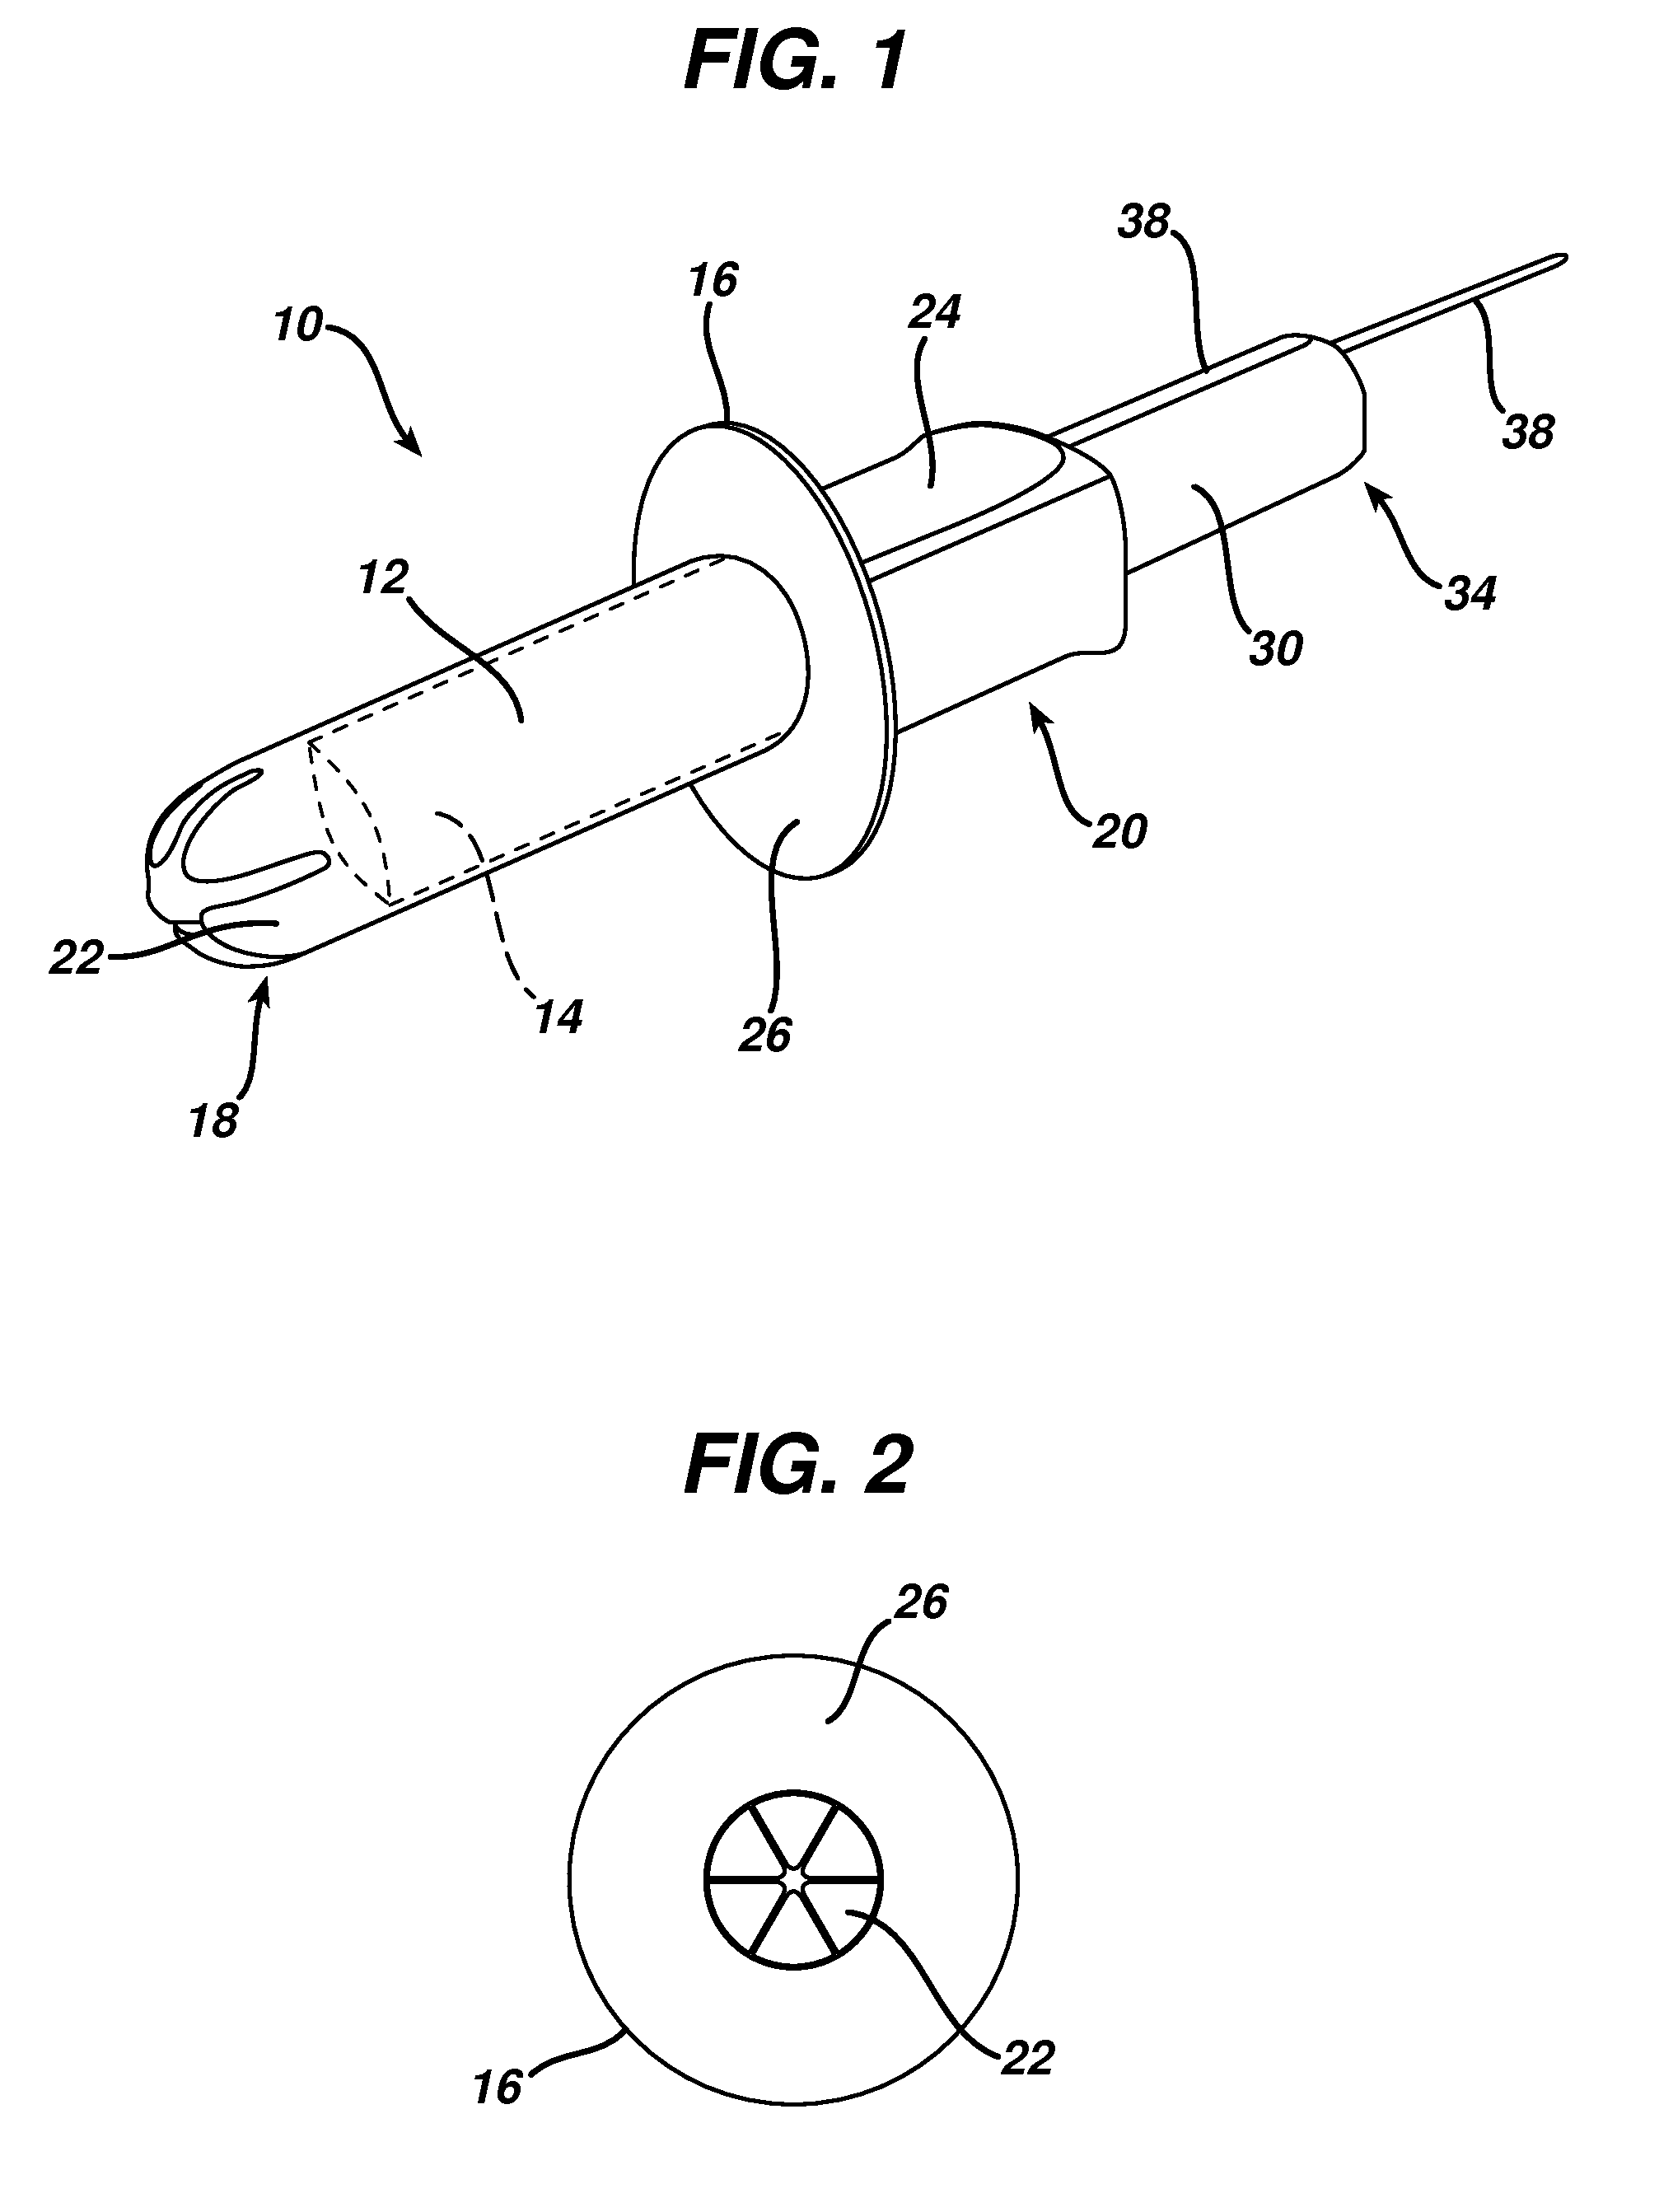 Adjustable applicator for urinary incontinence devices